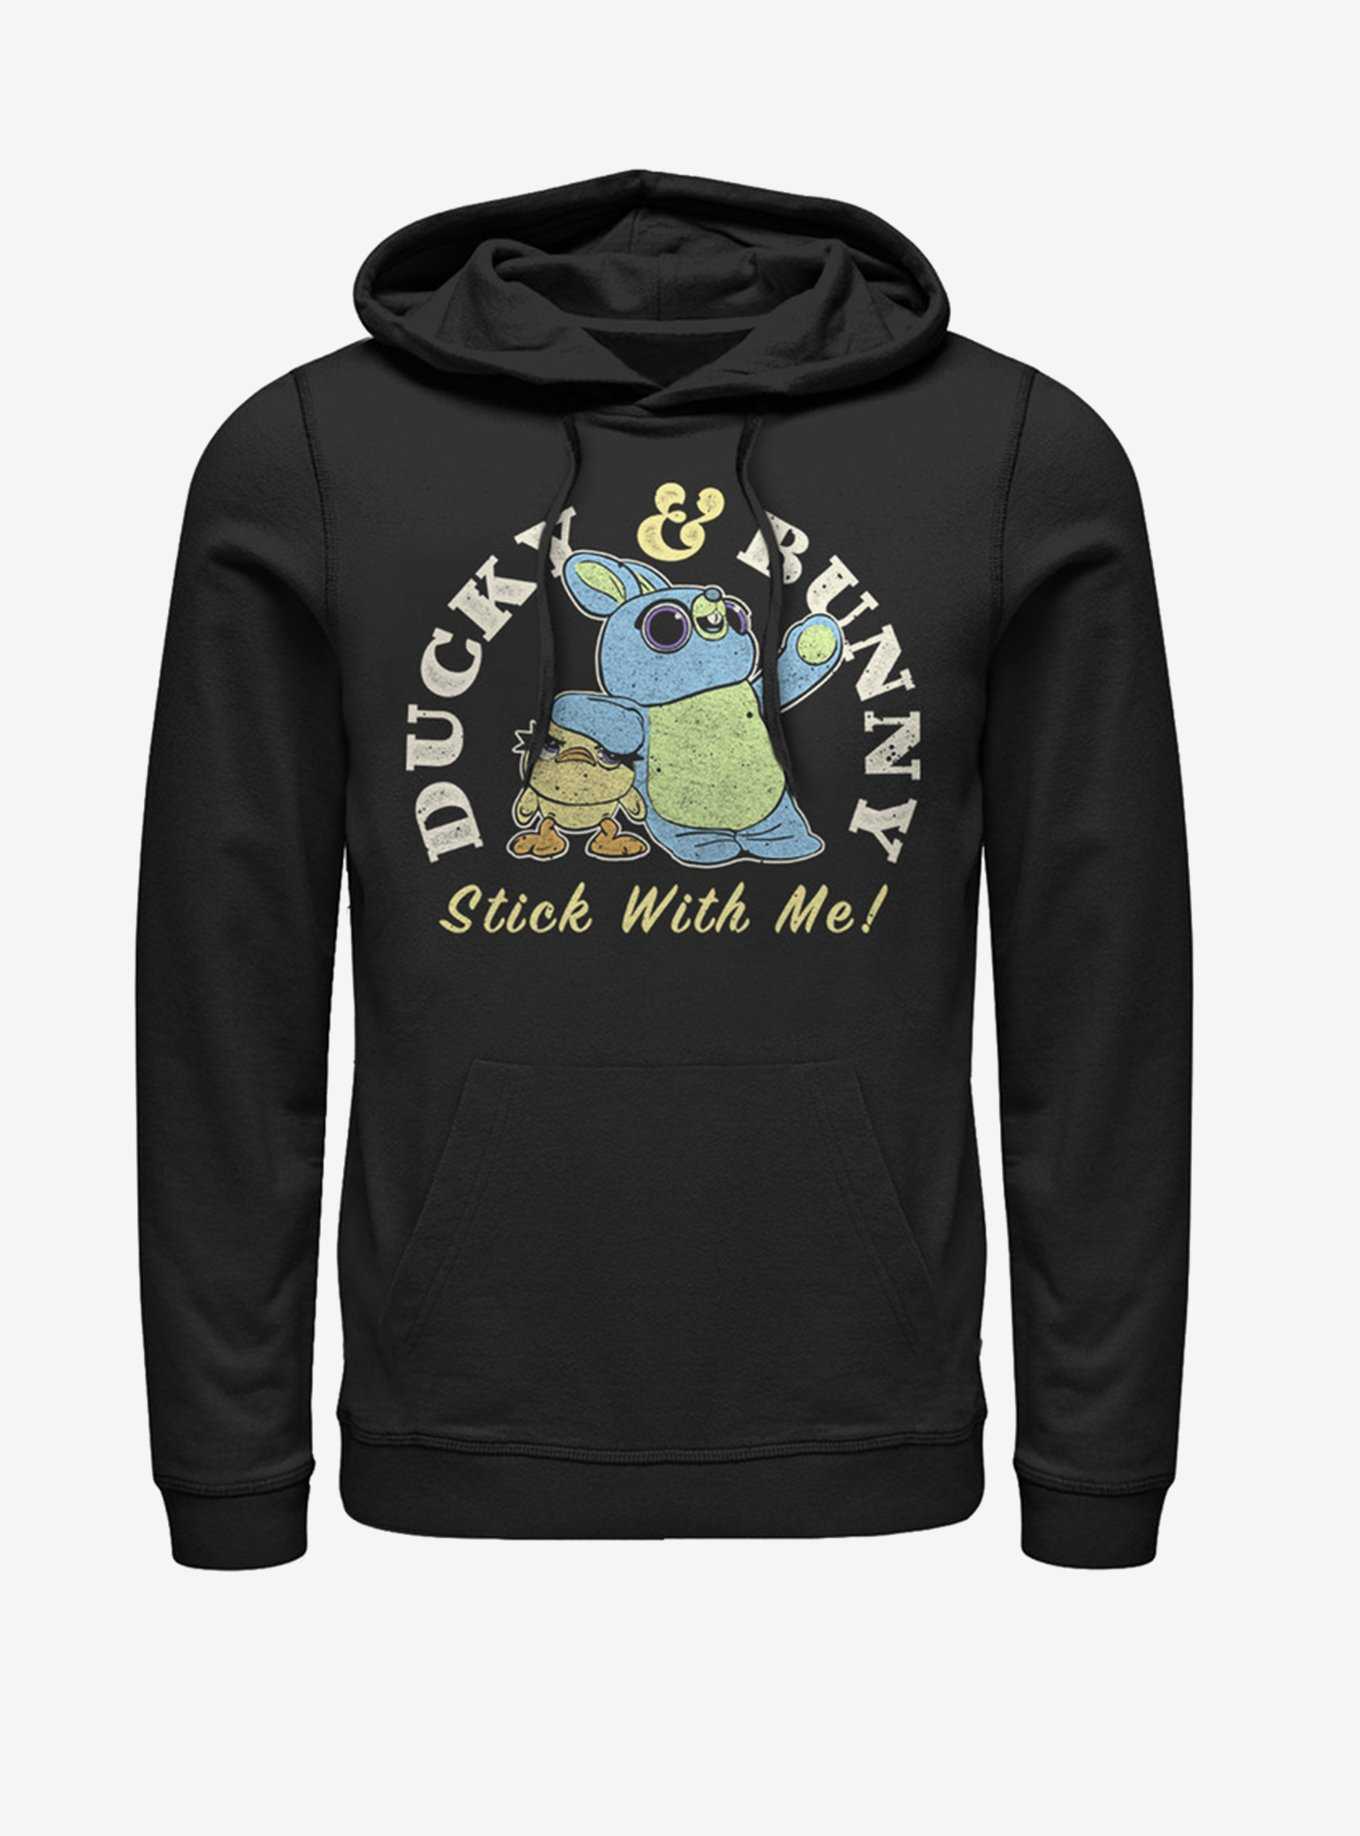 Disney Pixar Toy Story 4 Ducky And Bunny Brand Hoodie, , hi-res